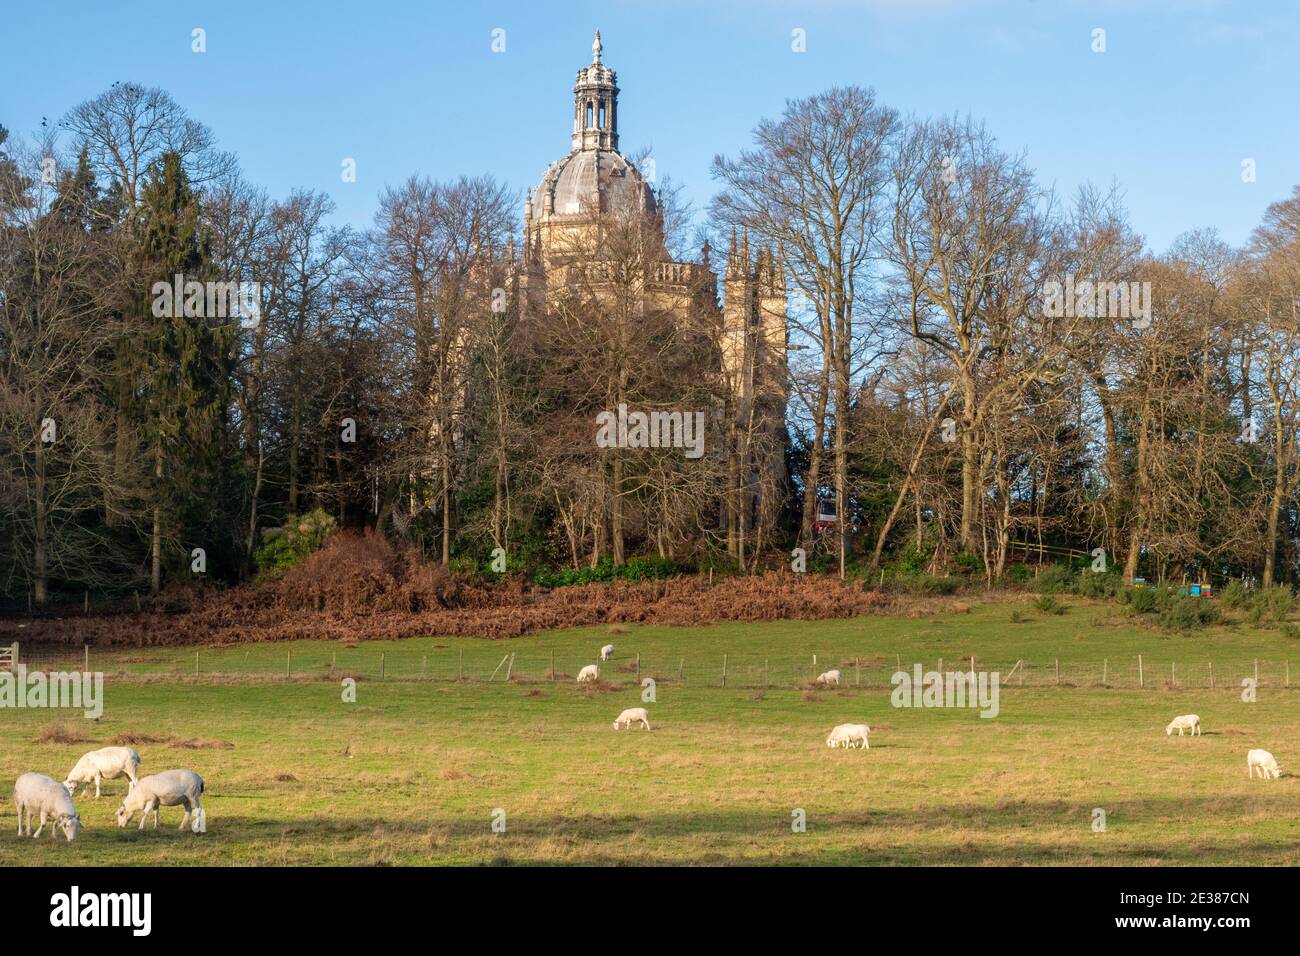 The church at St. Michael's Abbey, a Benedictine monastery in Farnborough, Hampshire, UK, with sheep grazing in a field in the foreground Stock Photo